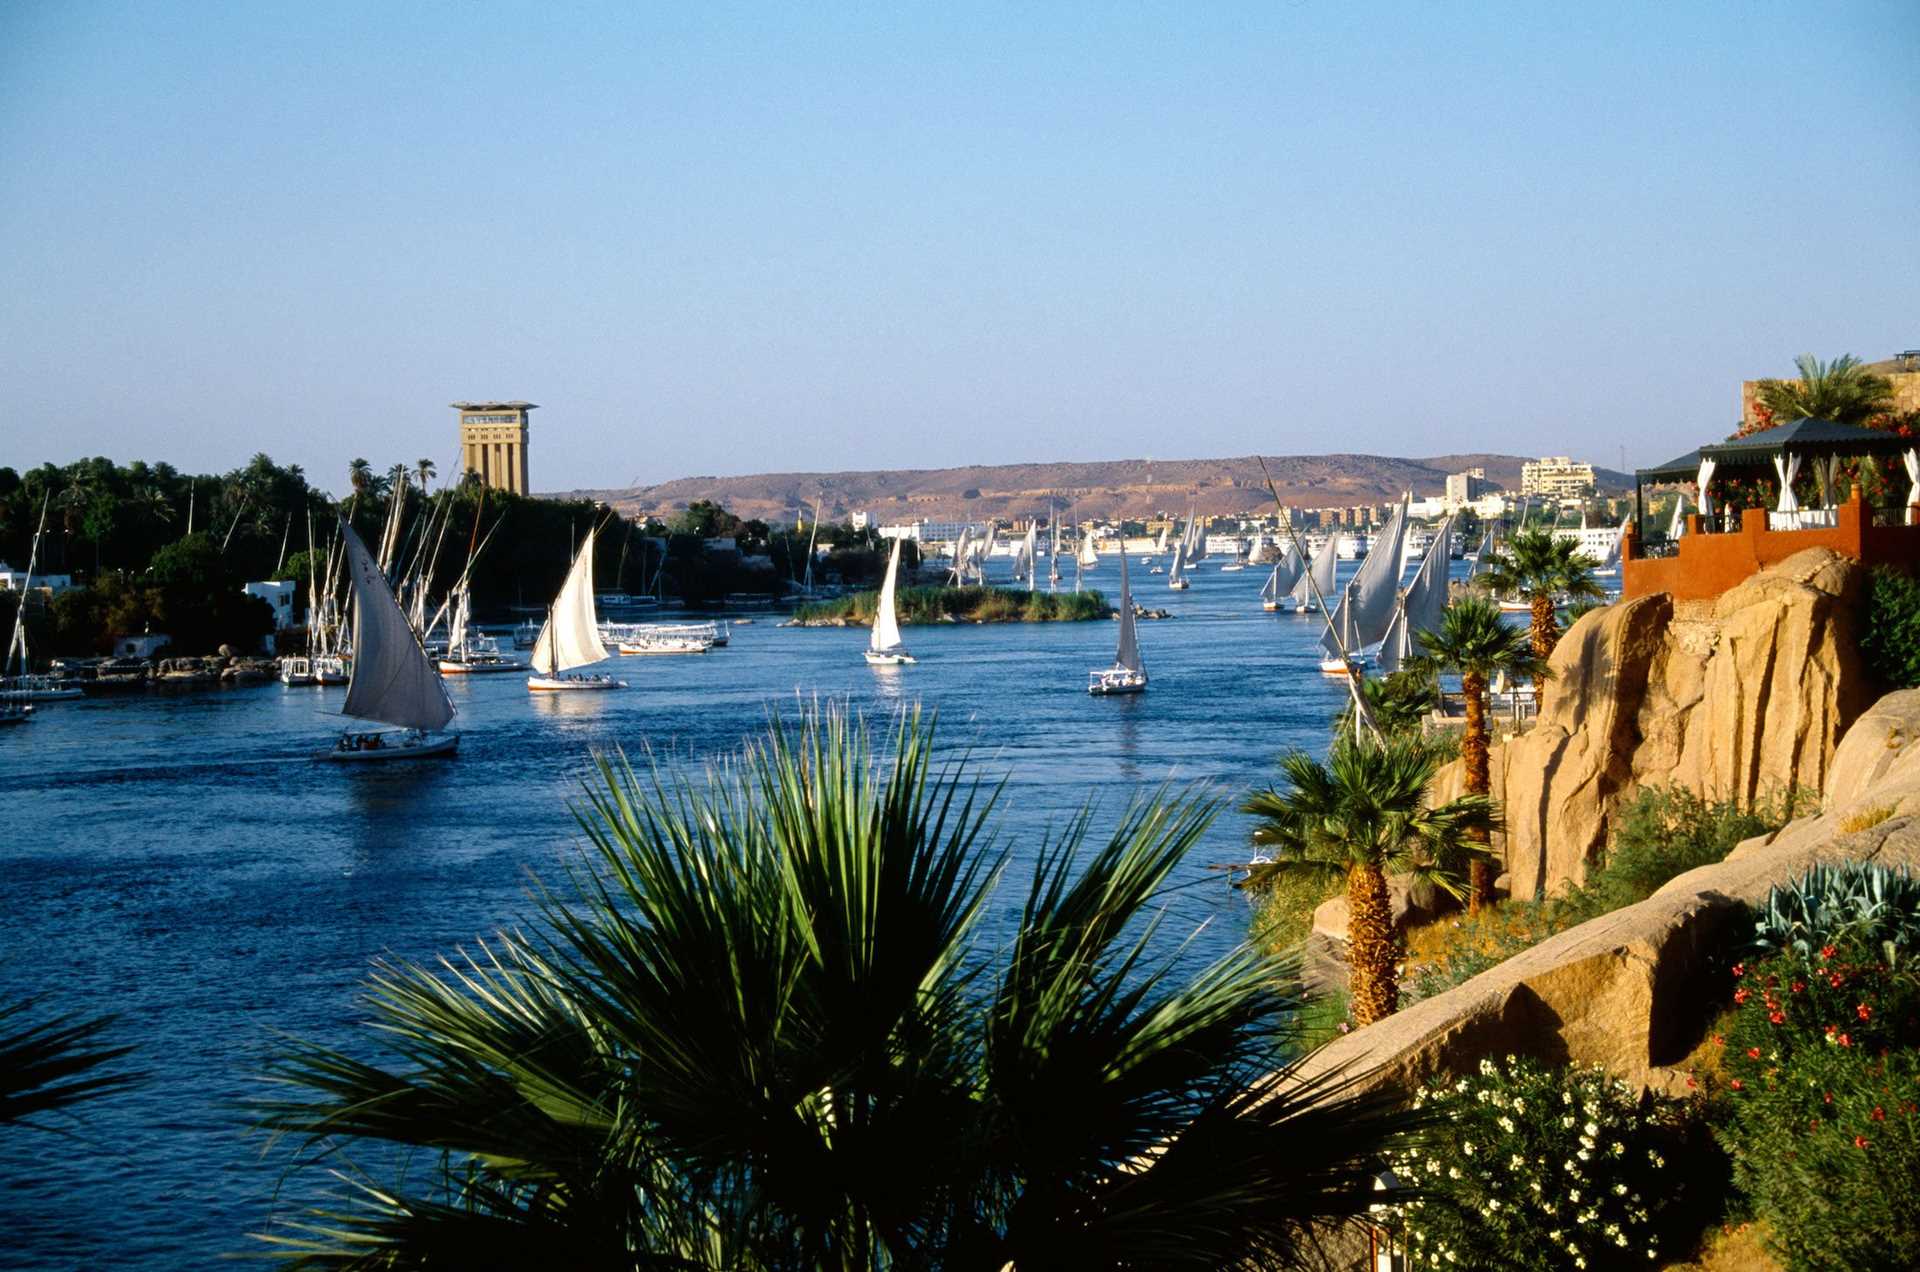 View from the Old Cataract Hotel in Aswan.jpg